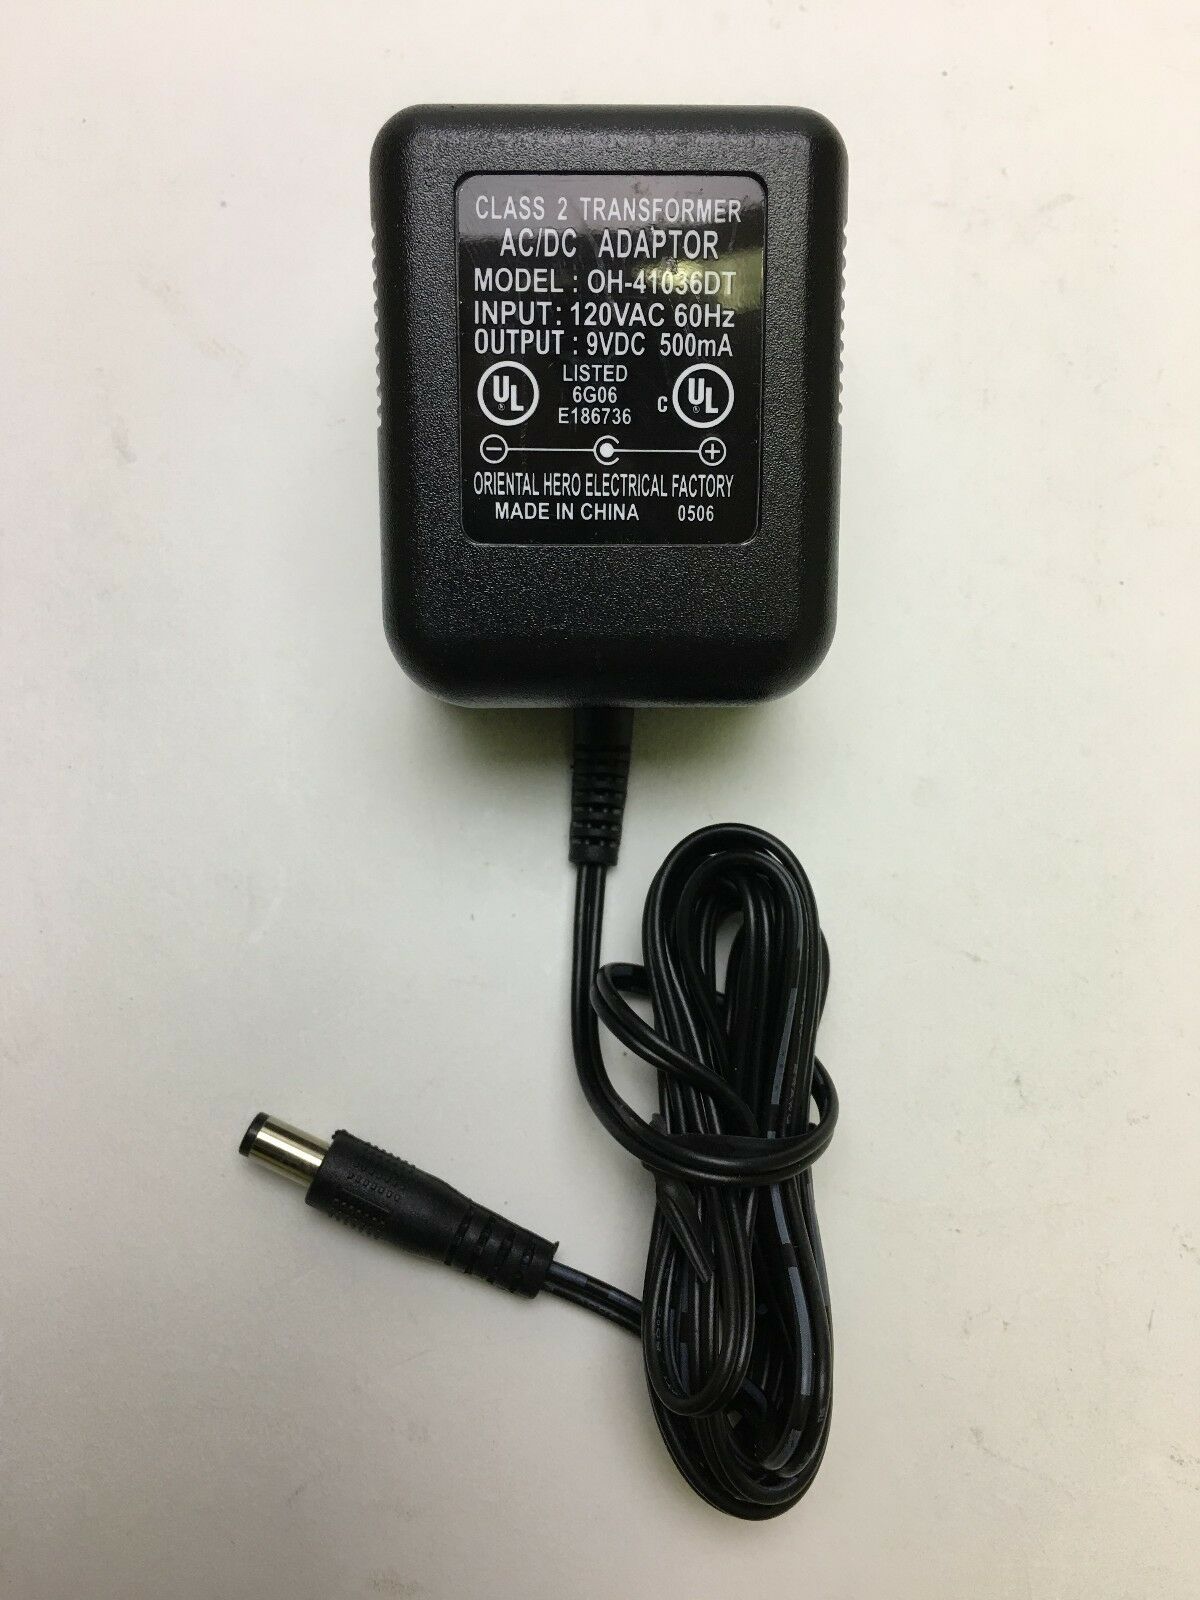 New 9V 500mA OH-41042DT Class 2 Transformer Ac Adapter